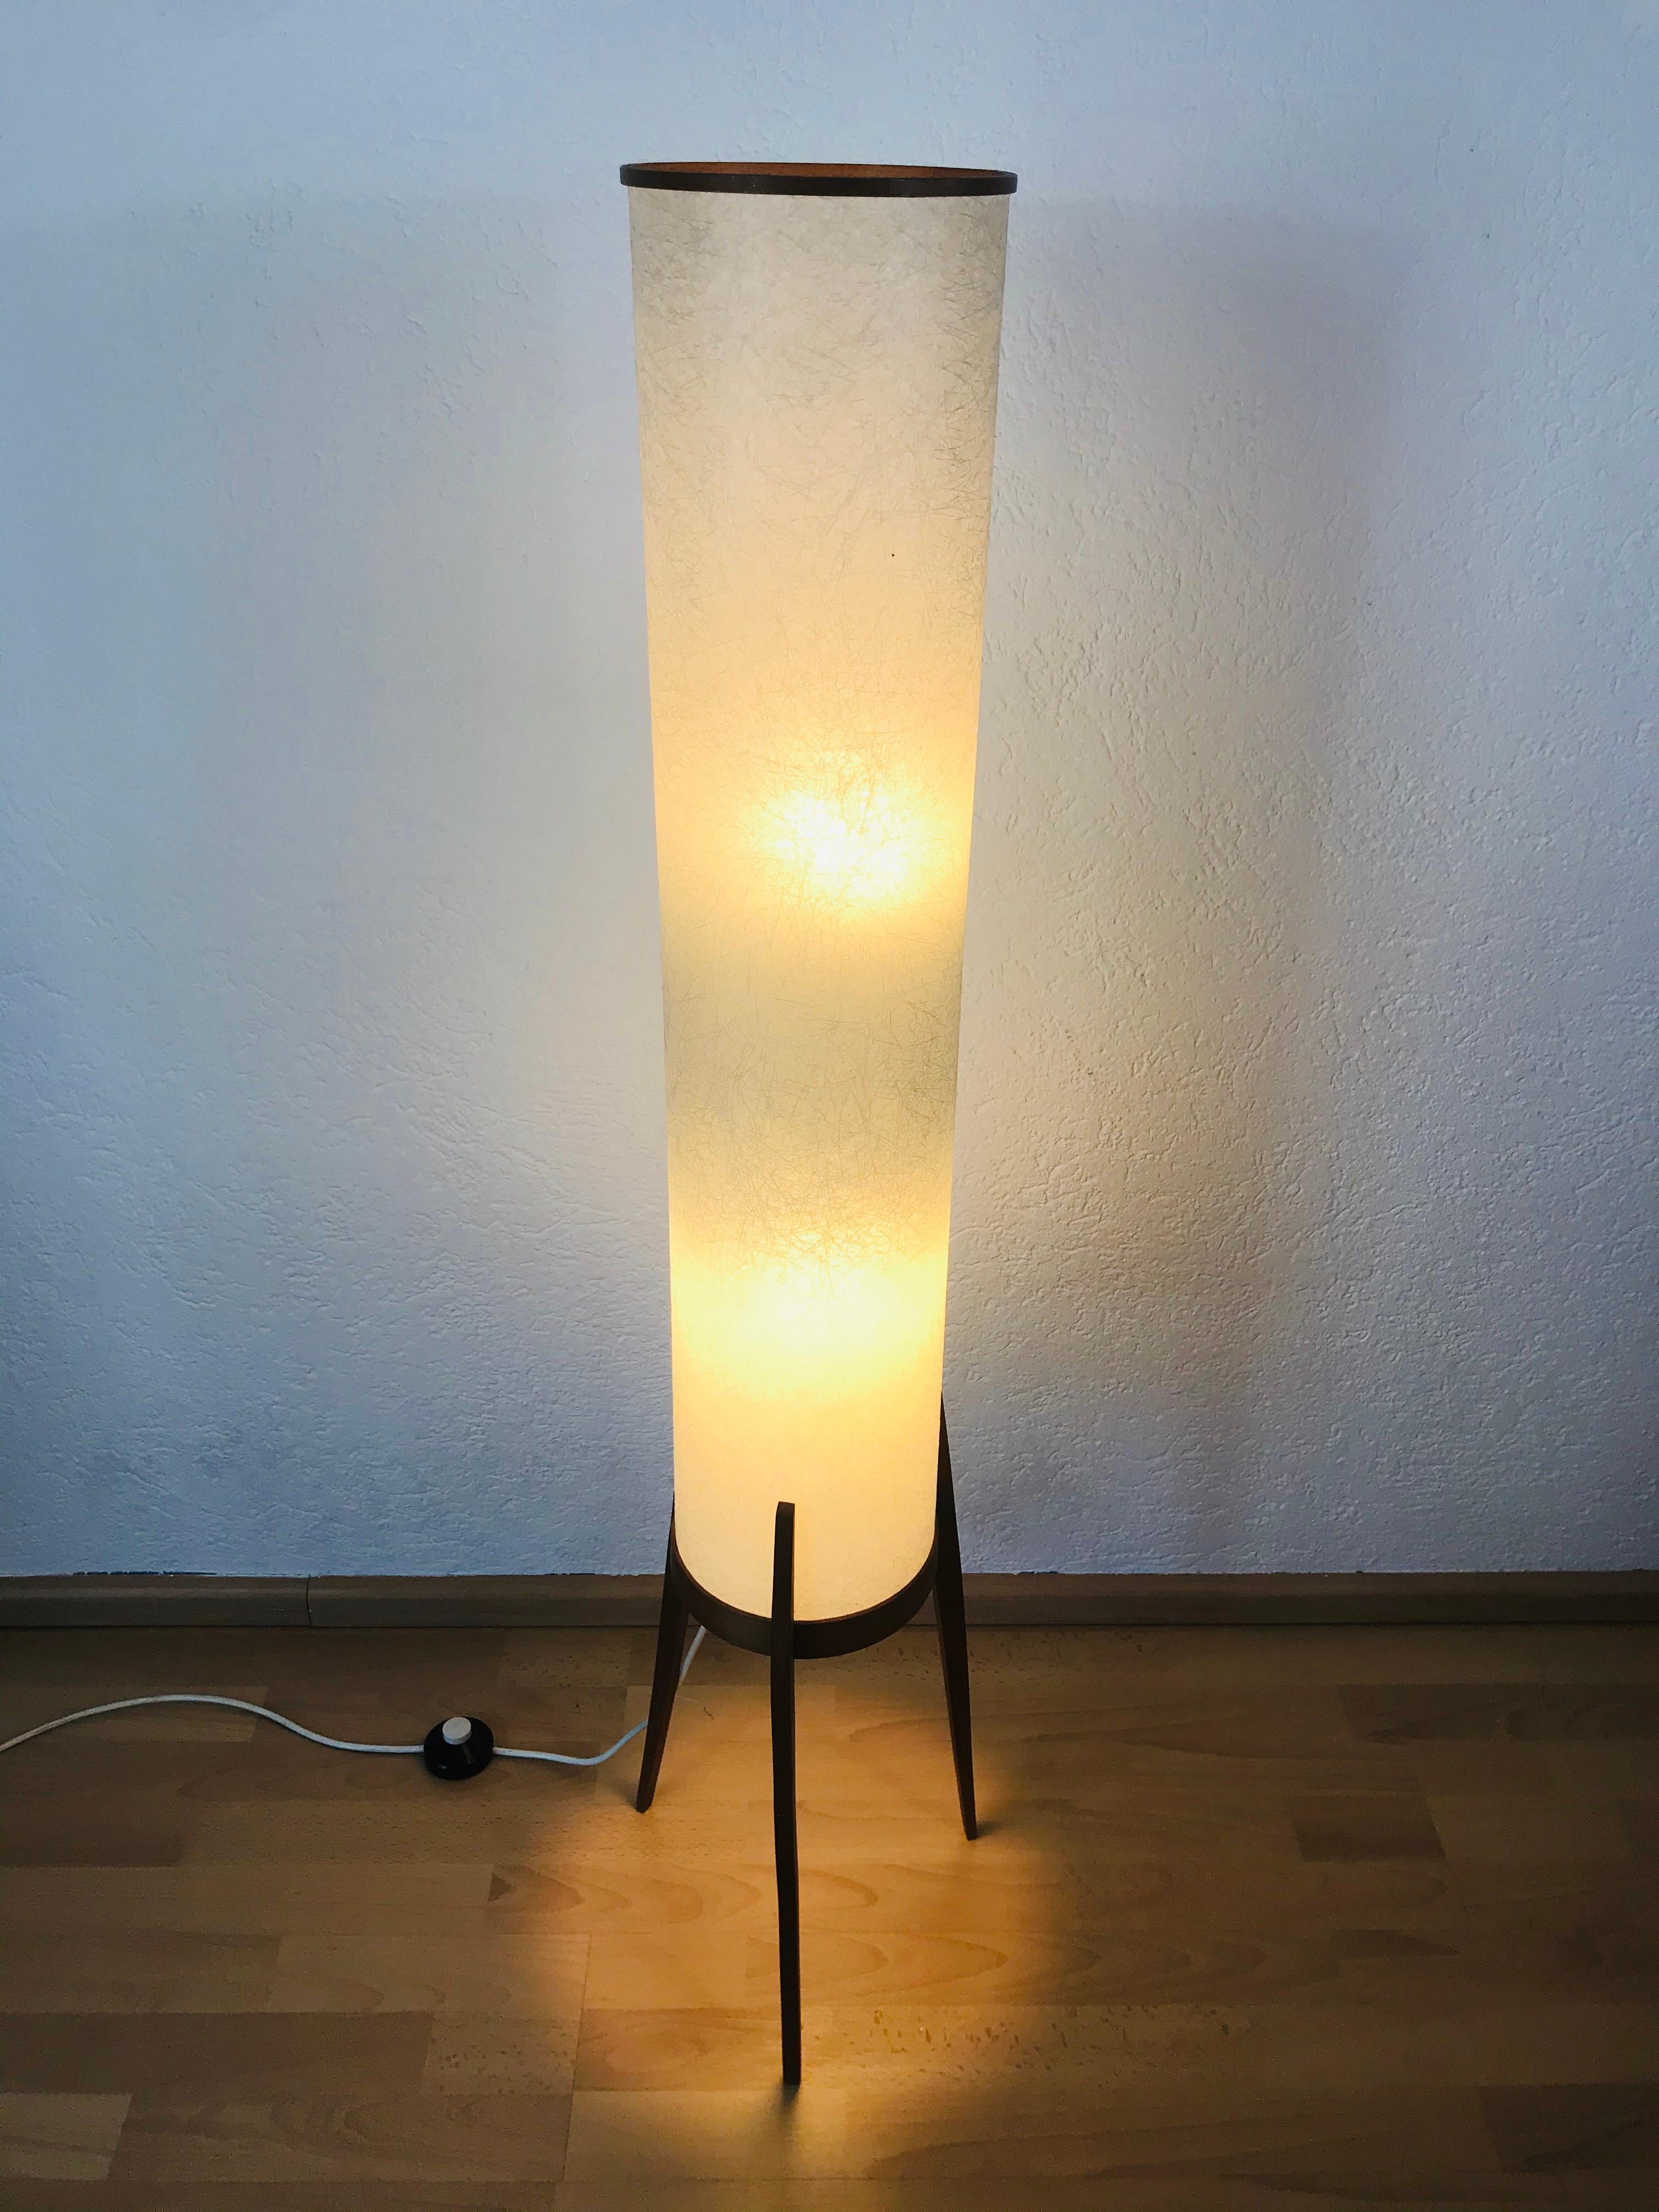 A midcentury floor lamp made in the 1960s. It is fascinating with its midcentury design and shade. The bottom of the light is teak wood. There are two E27 sockets in the body.

Very good vintage condition. The lighting requires two E27 light